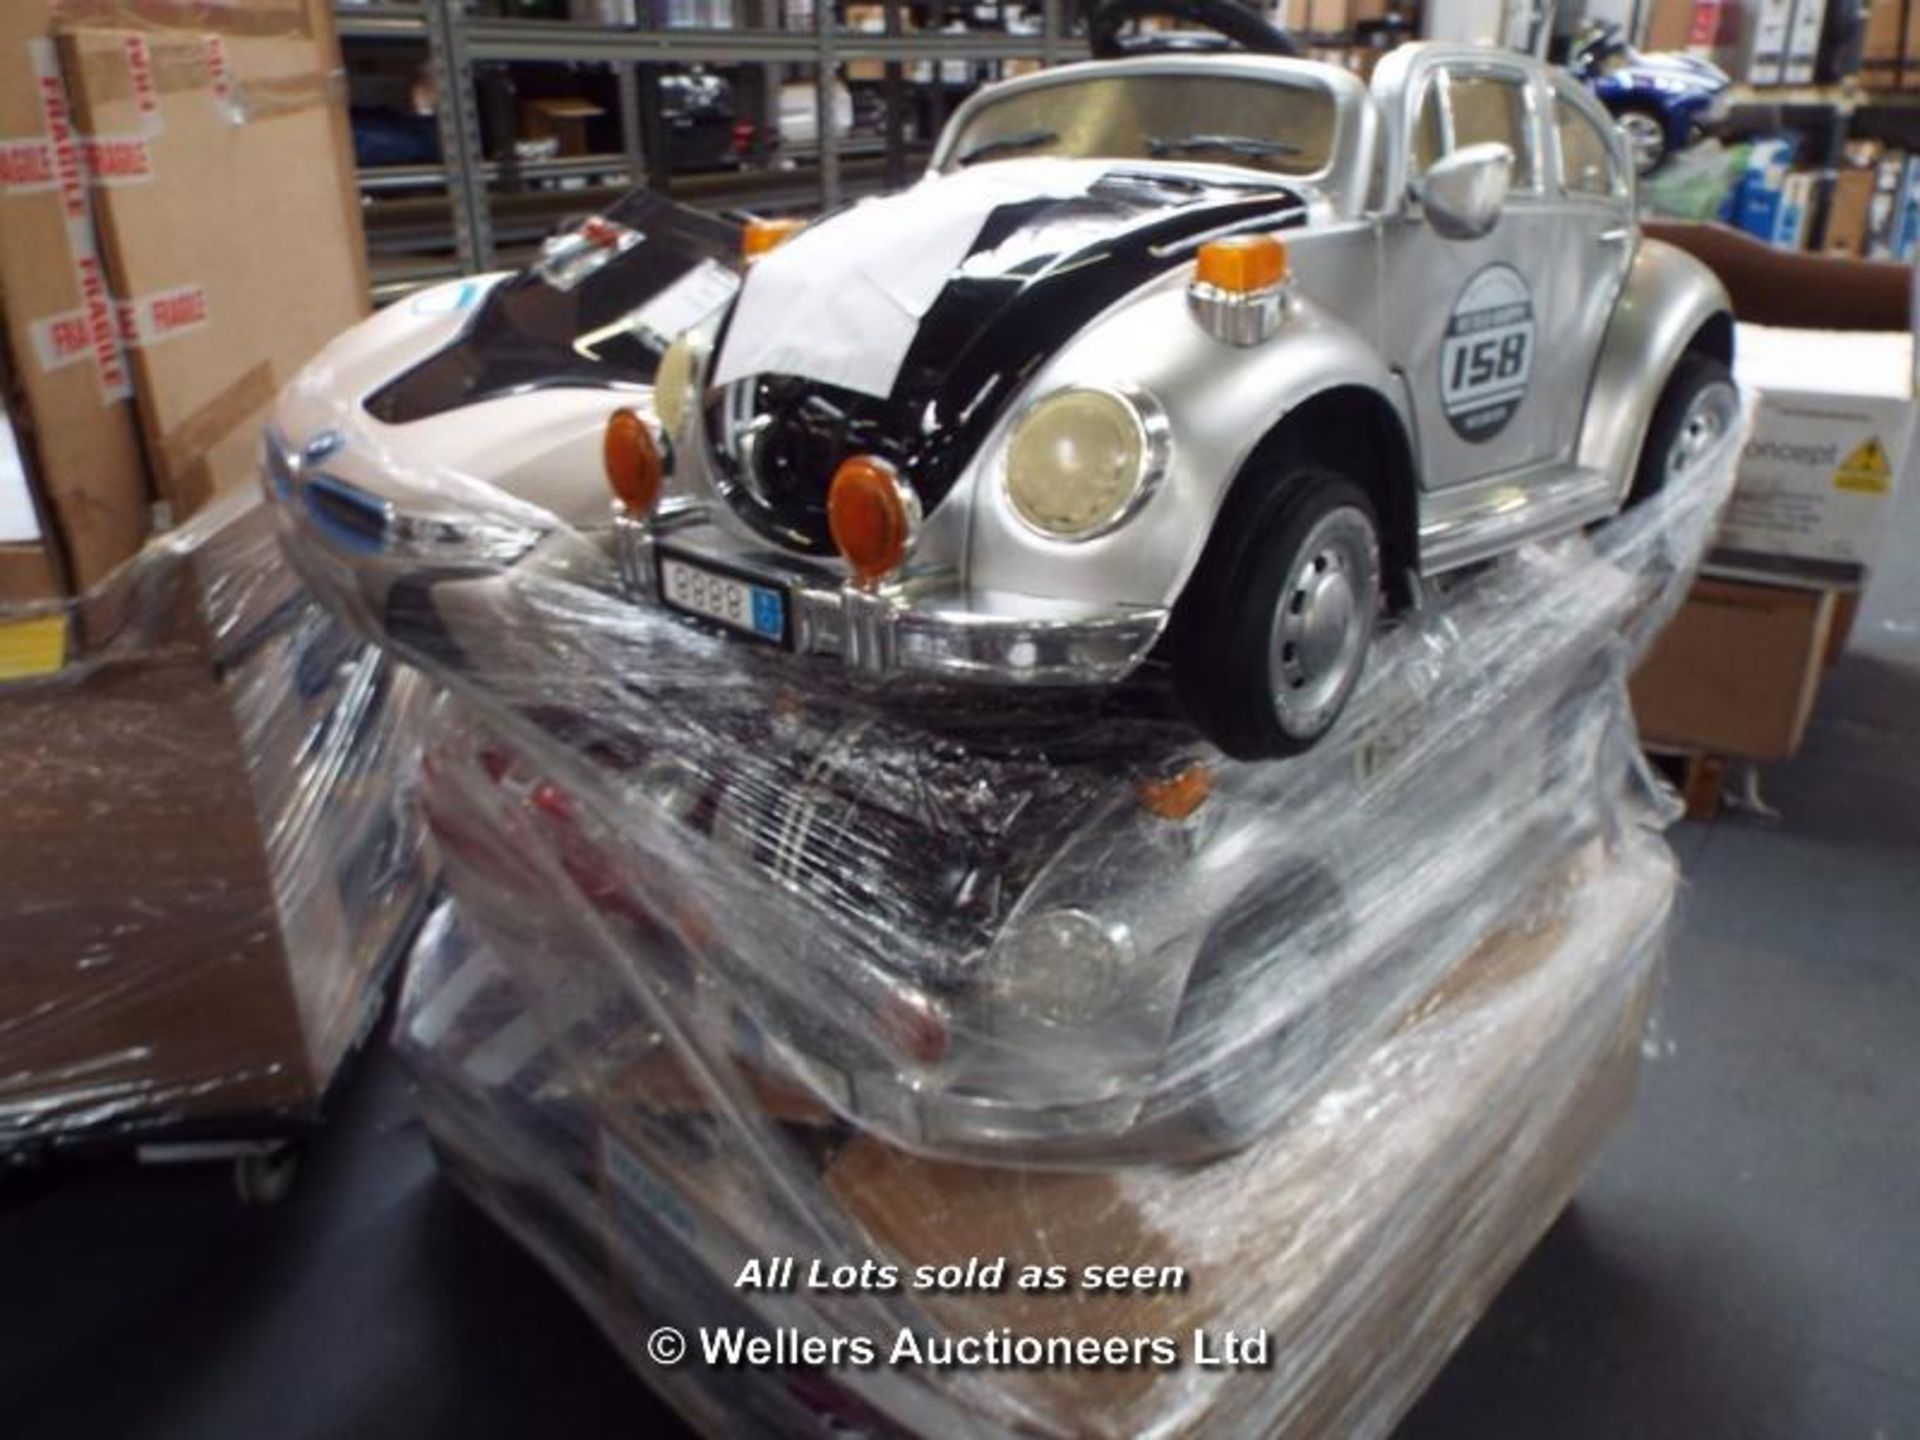 MIXED PALLET OF 6X KIDS RIDE-ON ELECTRONIC TOYS INCLUDING BMW I8, MINI COOPER, ASTON MARTIN,  VW - Image 2 of 3